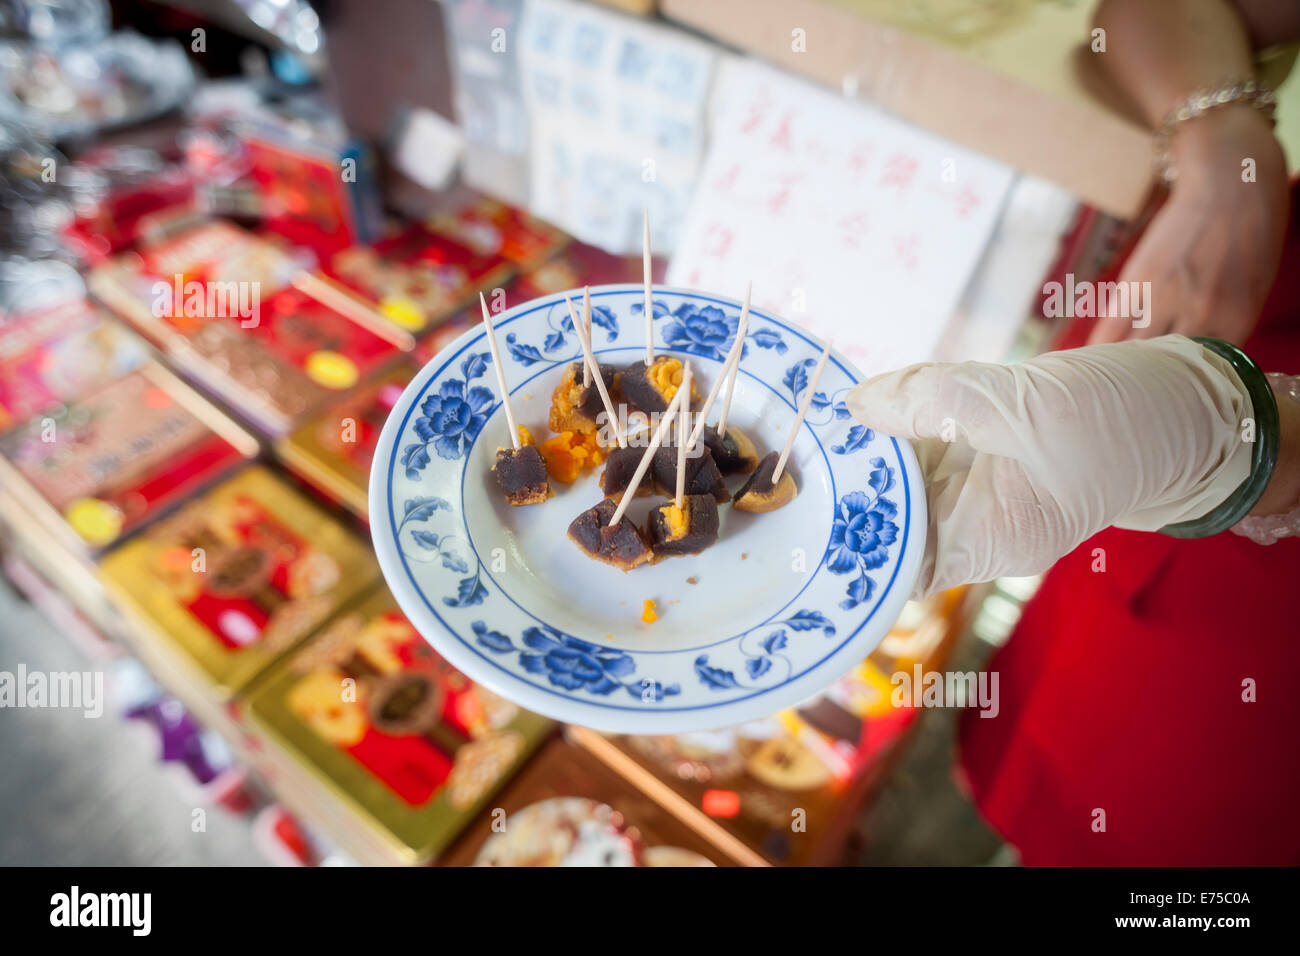 New York, USA. 7th September, 2014. A store in Chinatown in New York offer samples of their of mooncakes on Sunday, September 7, 2014 for the Mid-Autumn Festival which occurs on September 8. The delicious traditional baked product is eaten during the Mid-Autumn festival and are popular as gifts. The perfectly round pastries can be sweet or savory, filled with lotus seed or salted duck egg. The cakes represent the full moon on the eighth month, the fifteenth day in the Chinese (lunar) calendar. Credit:  Richard Levine/Alamy Live News Stock Photo